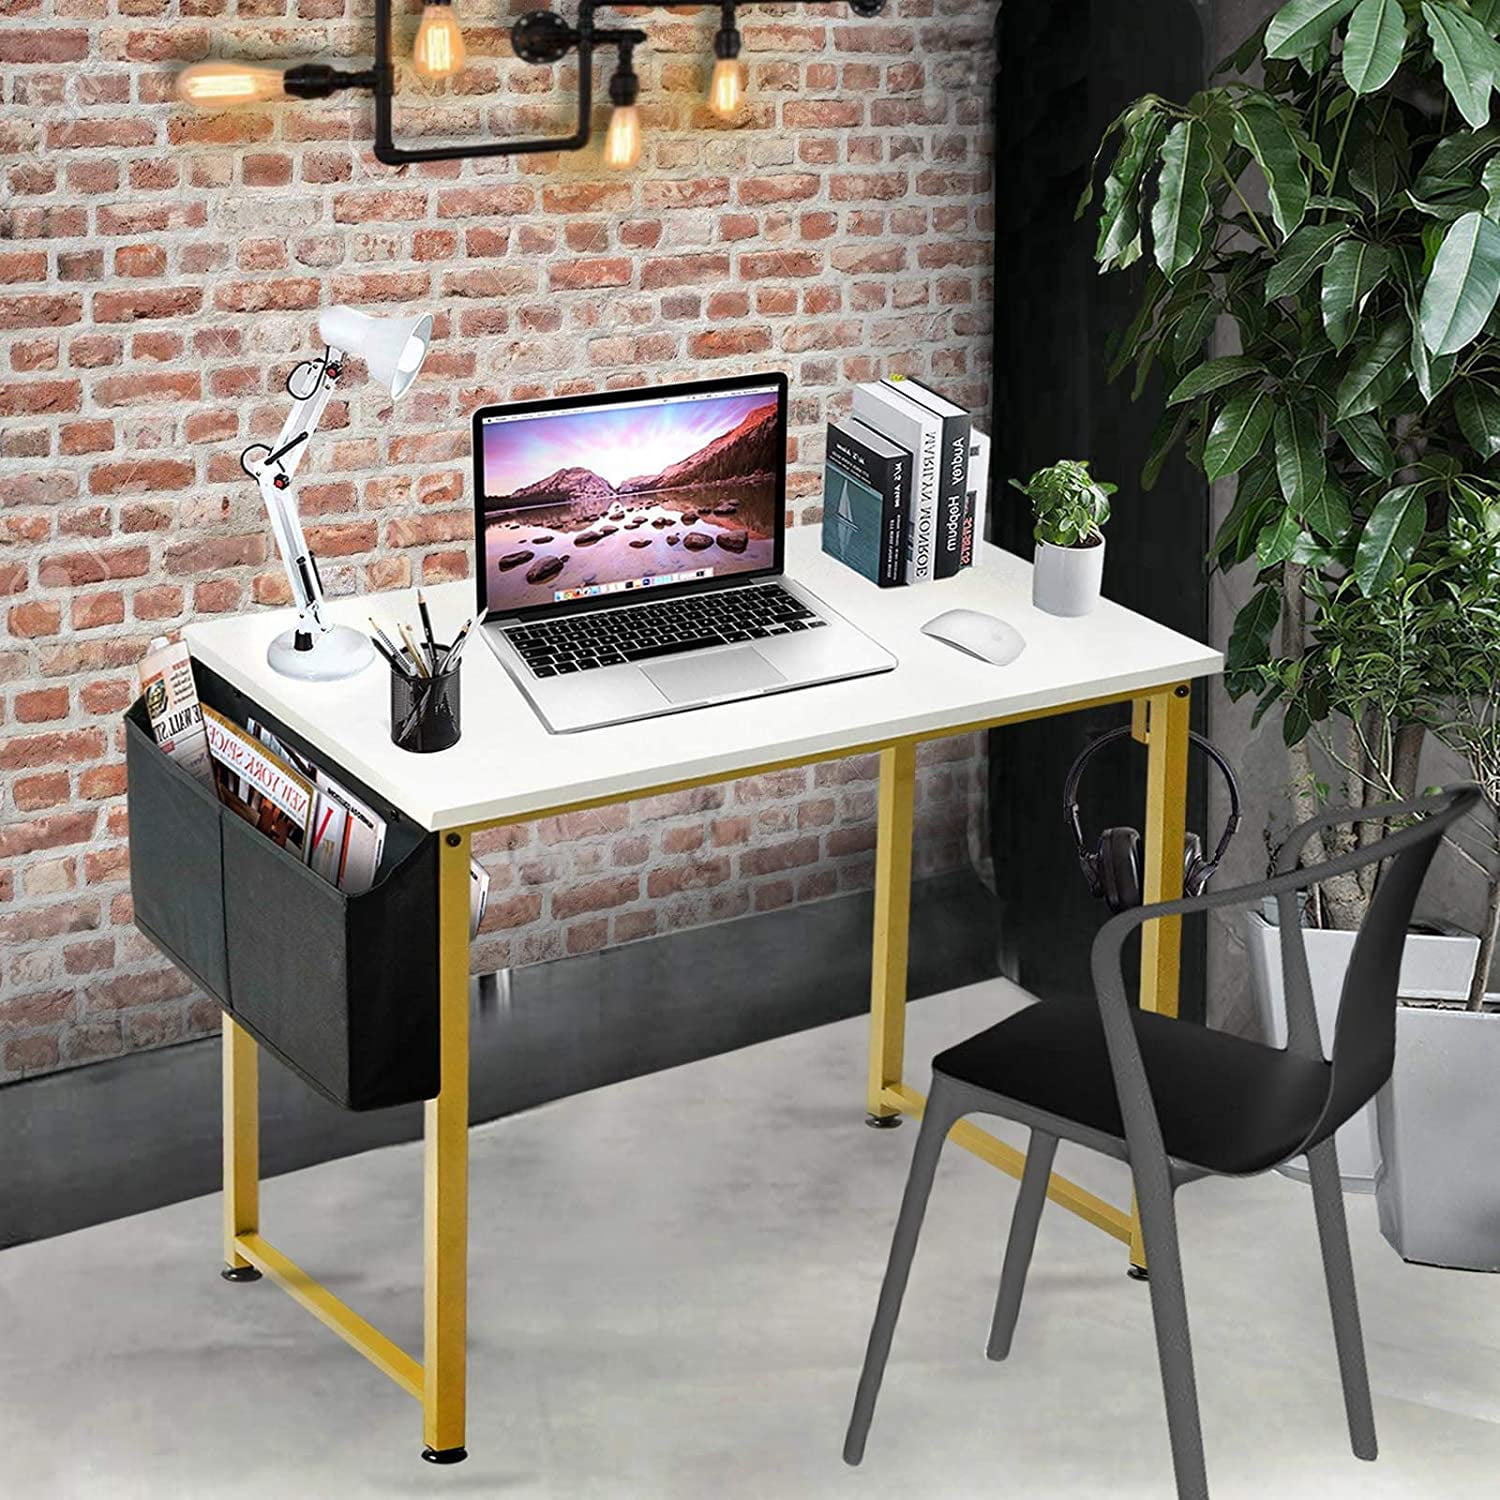 BOLUO Small Computer Desk for Small Spaces Solid Wood Rustic Home